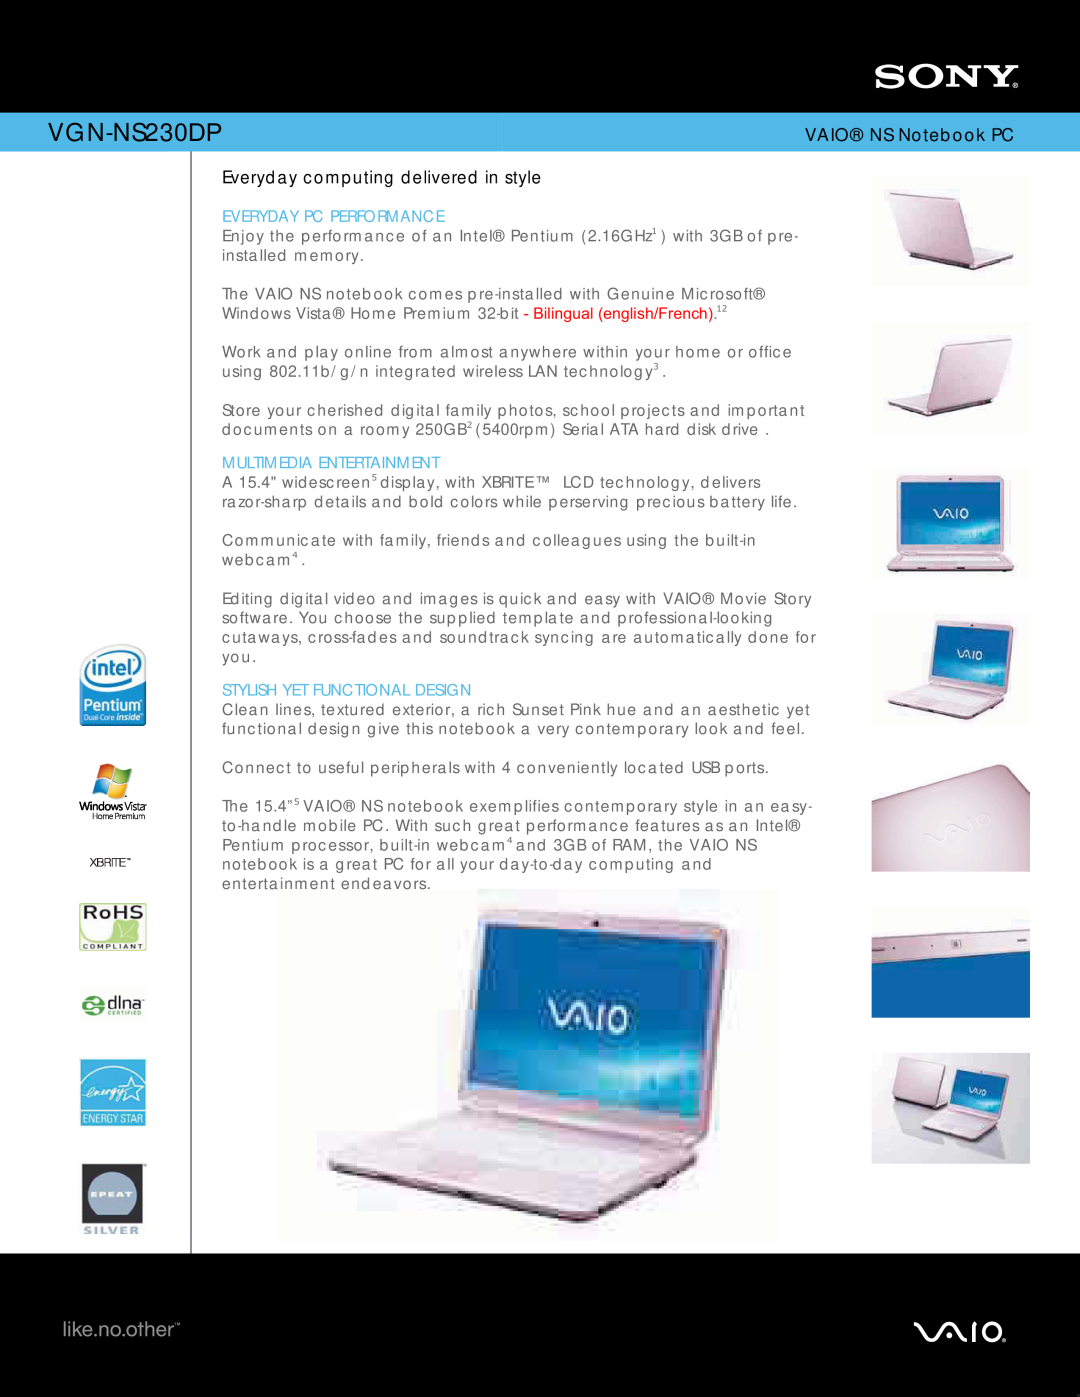 Sony VGN-NS230DP manual VAIO NS Notebook PC, Everyday computing delivered in style, Everyday Pc Performance 